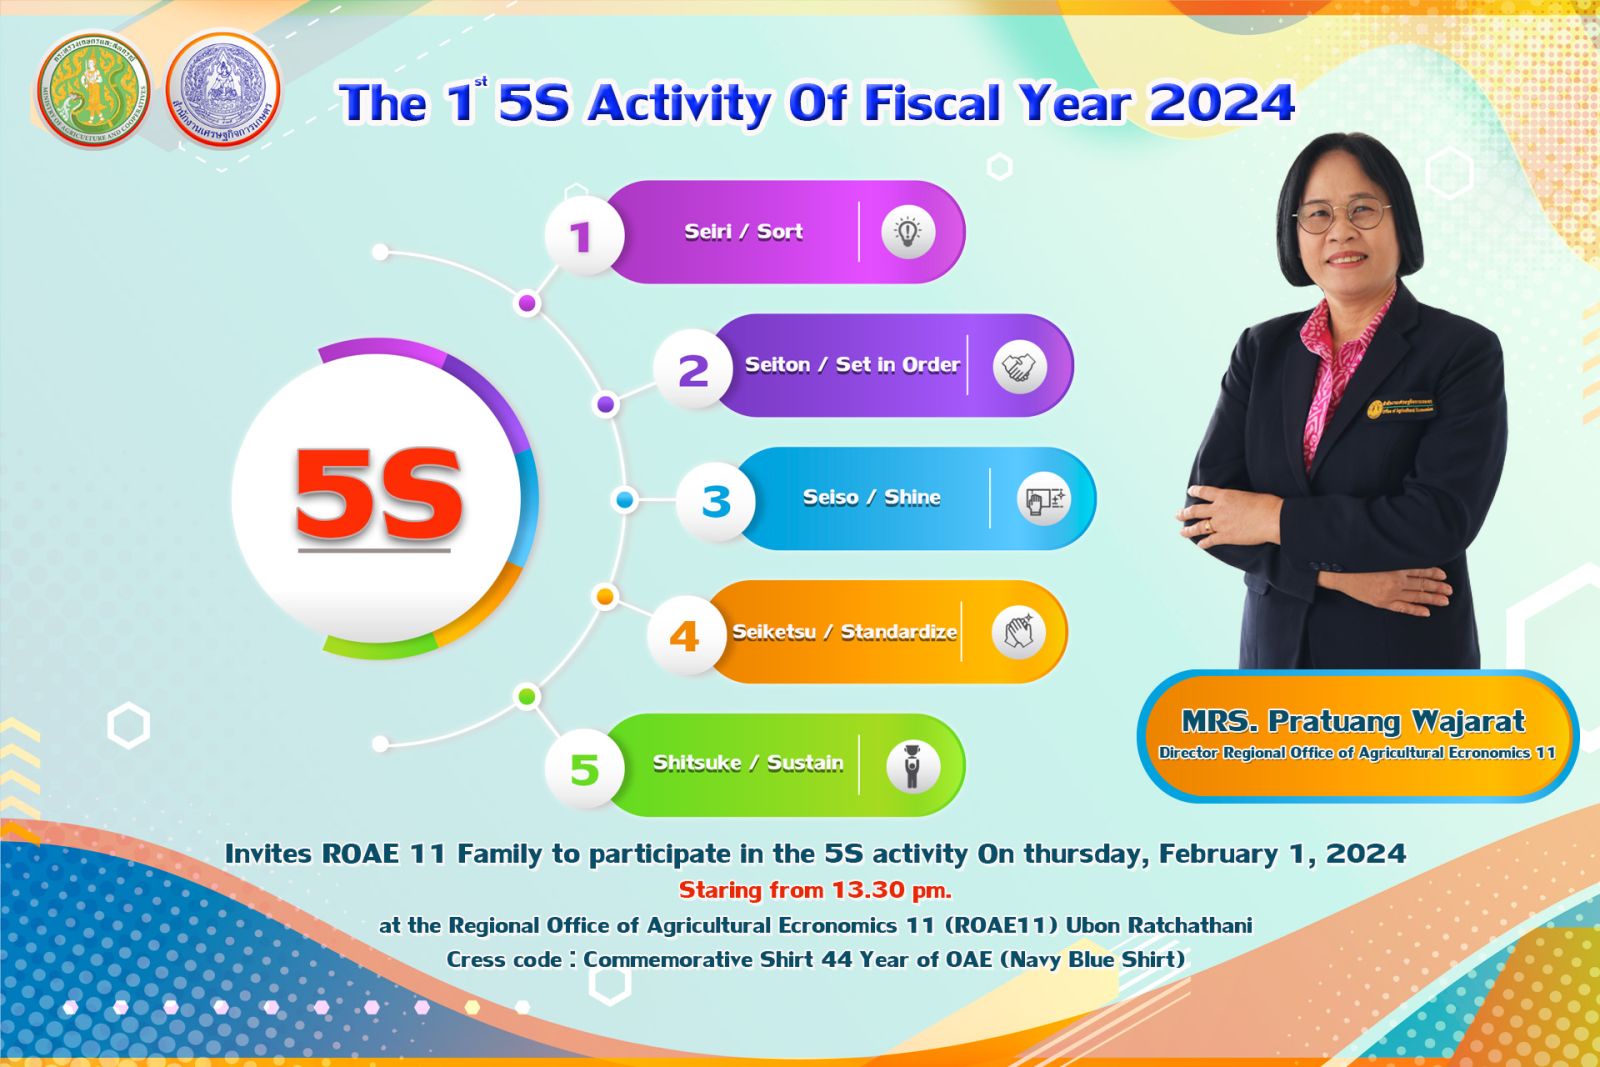 The 1 5S Activity Of Fiscal Year 2024 Invites ROAE 11 Family to participate in the 5S activity On thursday,February 1,2024 Staring from 13.30 pm.